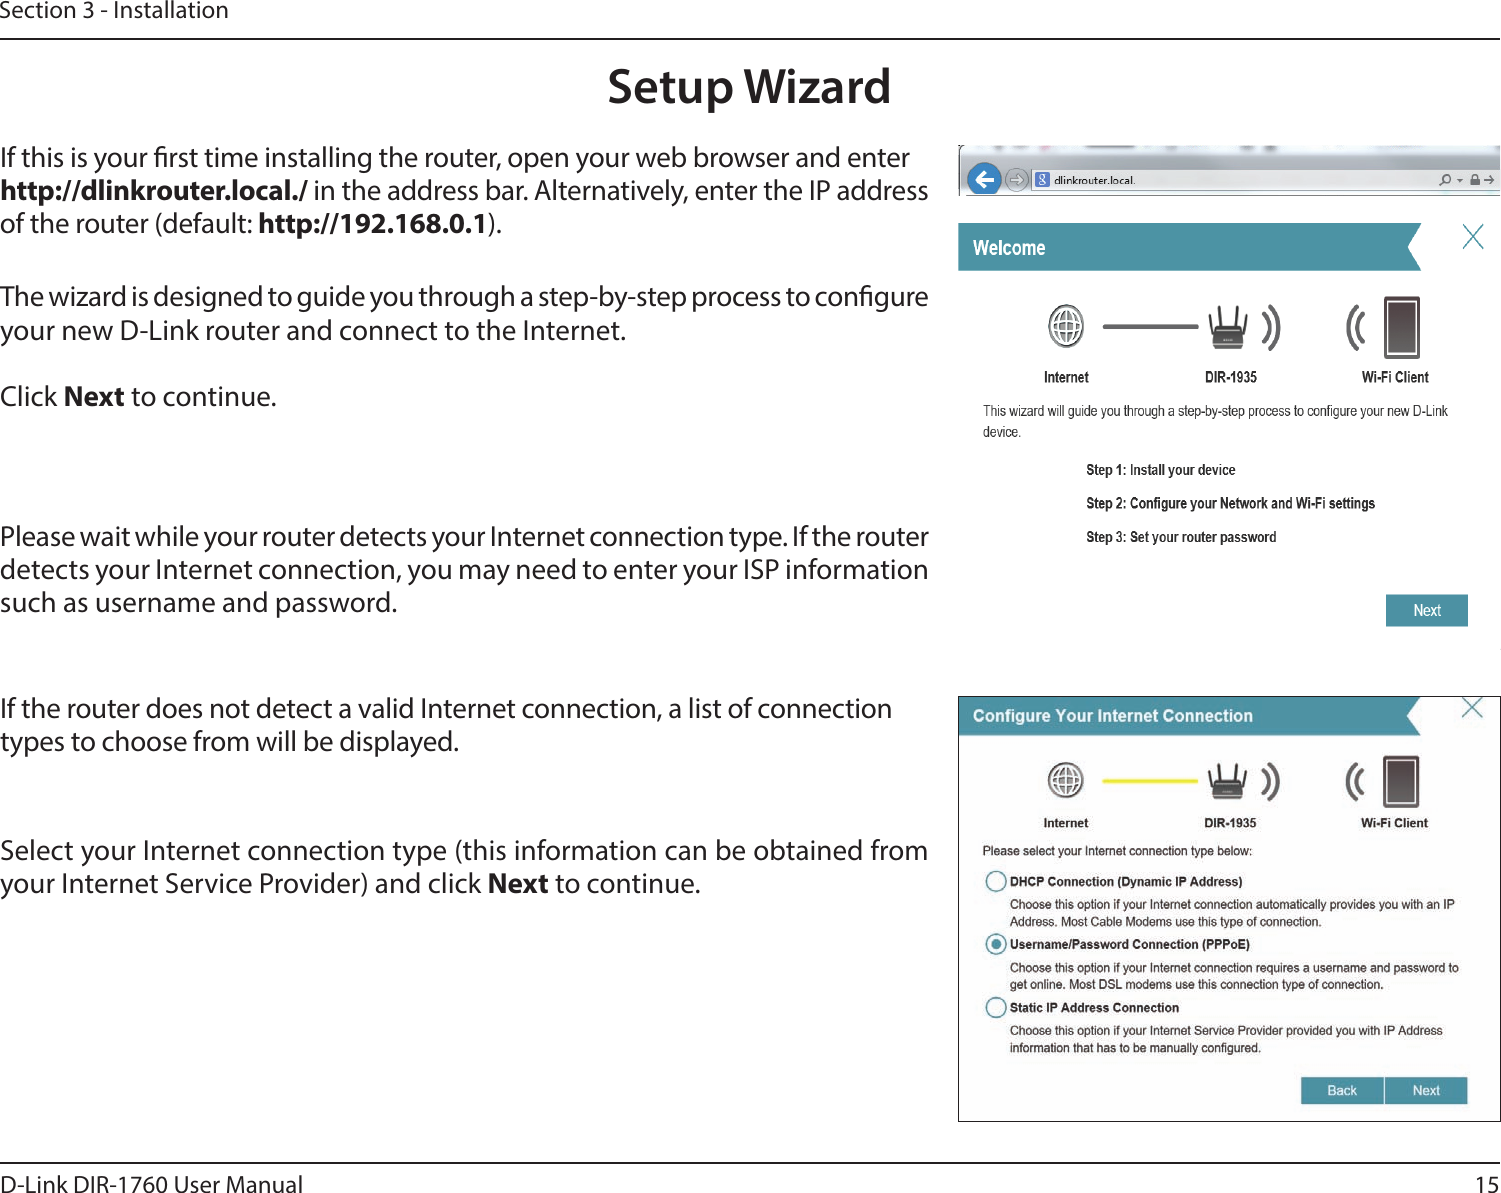 15D-Link DIR-1760 User ManualSection 3 - InstallationThe wizard is designed to guide you through a step-by-step process to congure your new D-Link router and connect to the Internet.Click Next to continue. Setup WizardIf this is your rst time installing the router, open your web browser and enter http://dlinkrouter.local./ in the address bar. Alternatively, enter the IP address of the router (default: http://192.168.0.1). Please wait while your router detects your Internet connection type. If the router detects your Internet connection, you may need to enter your ISP information such as username and password.If the router does not detect a valid Internet connection, a list of connection types to choose from will be displayed.Select your Internet connection type (this information can be obtained from your Internet Service Provider) and click Next to continue.